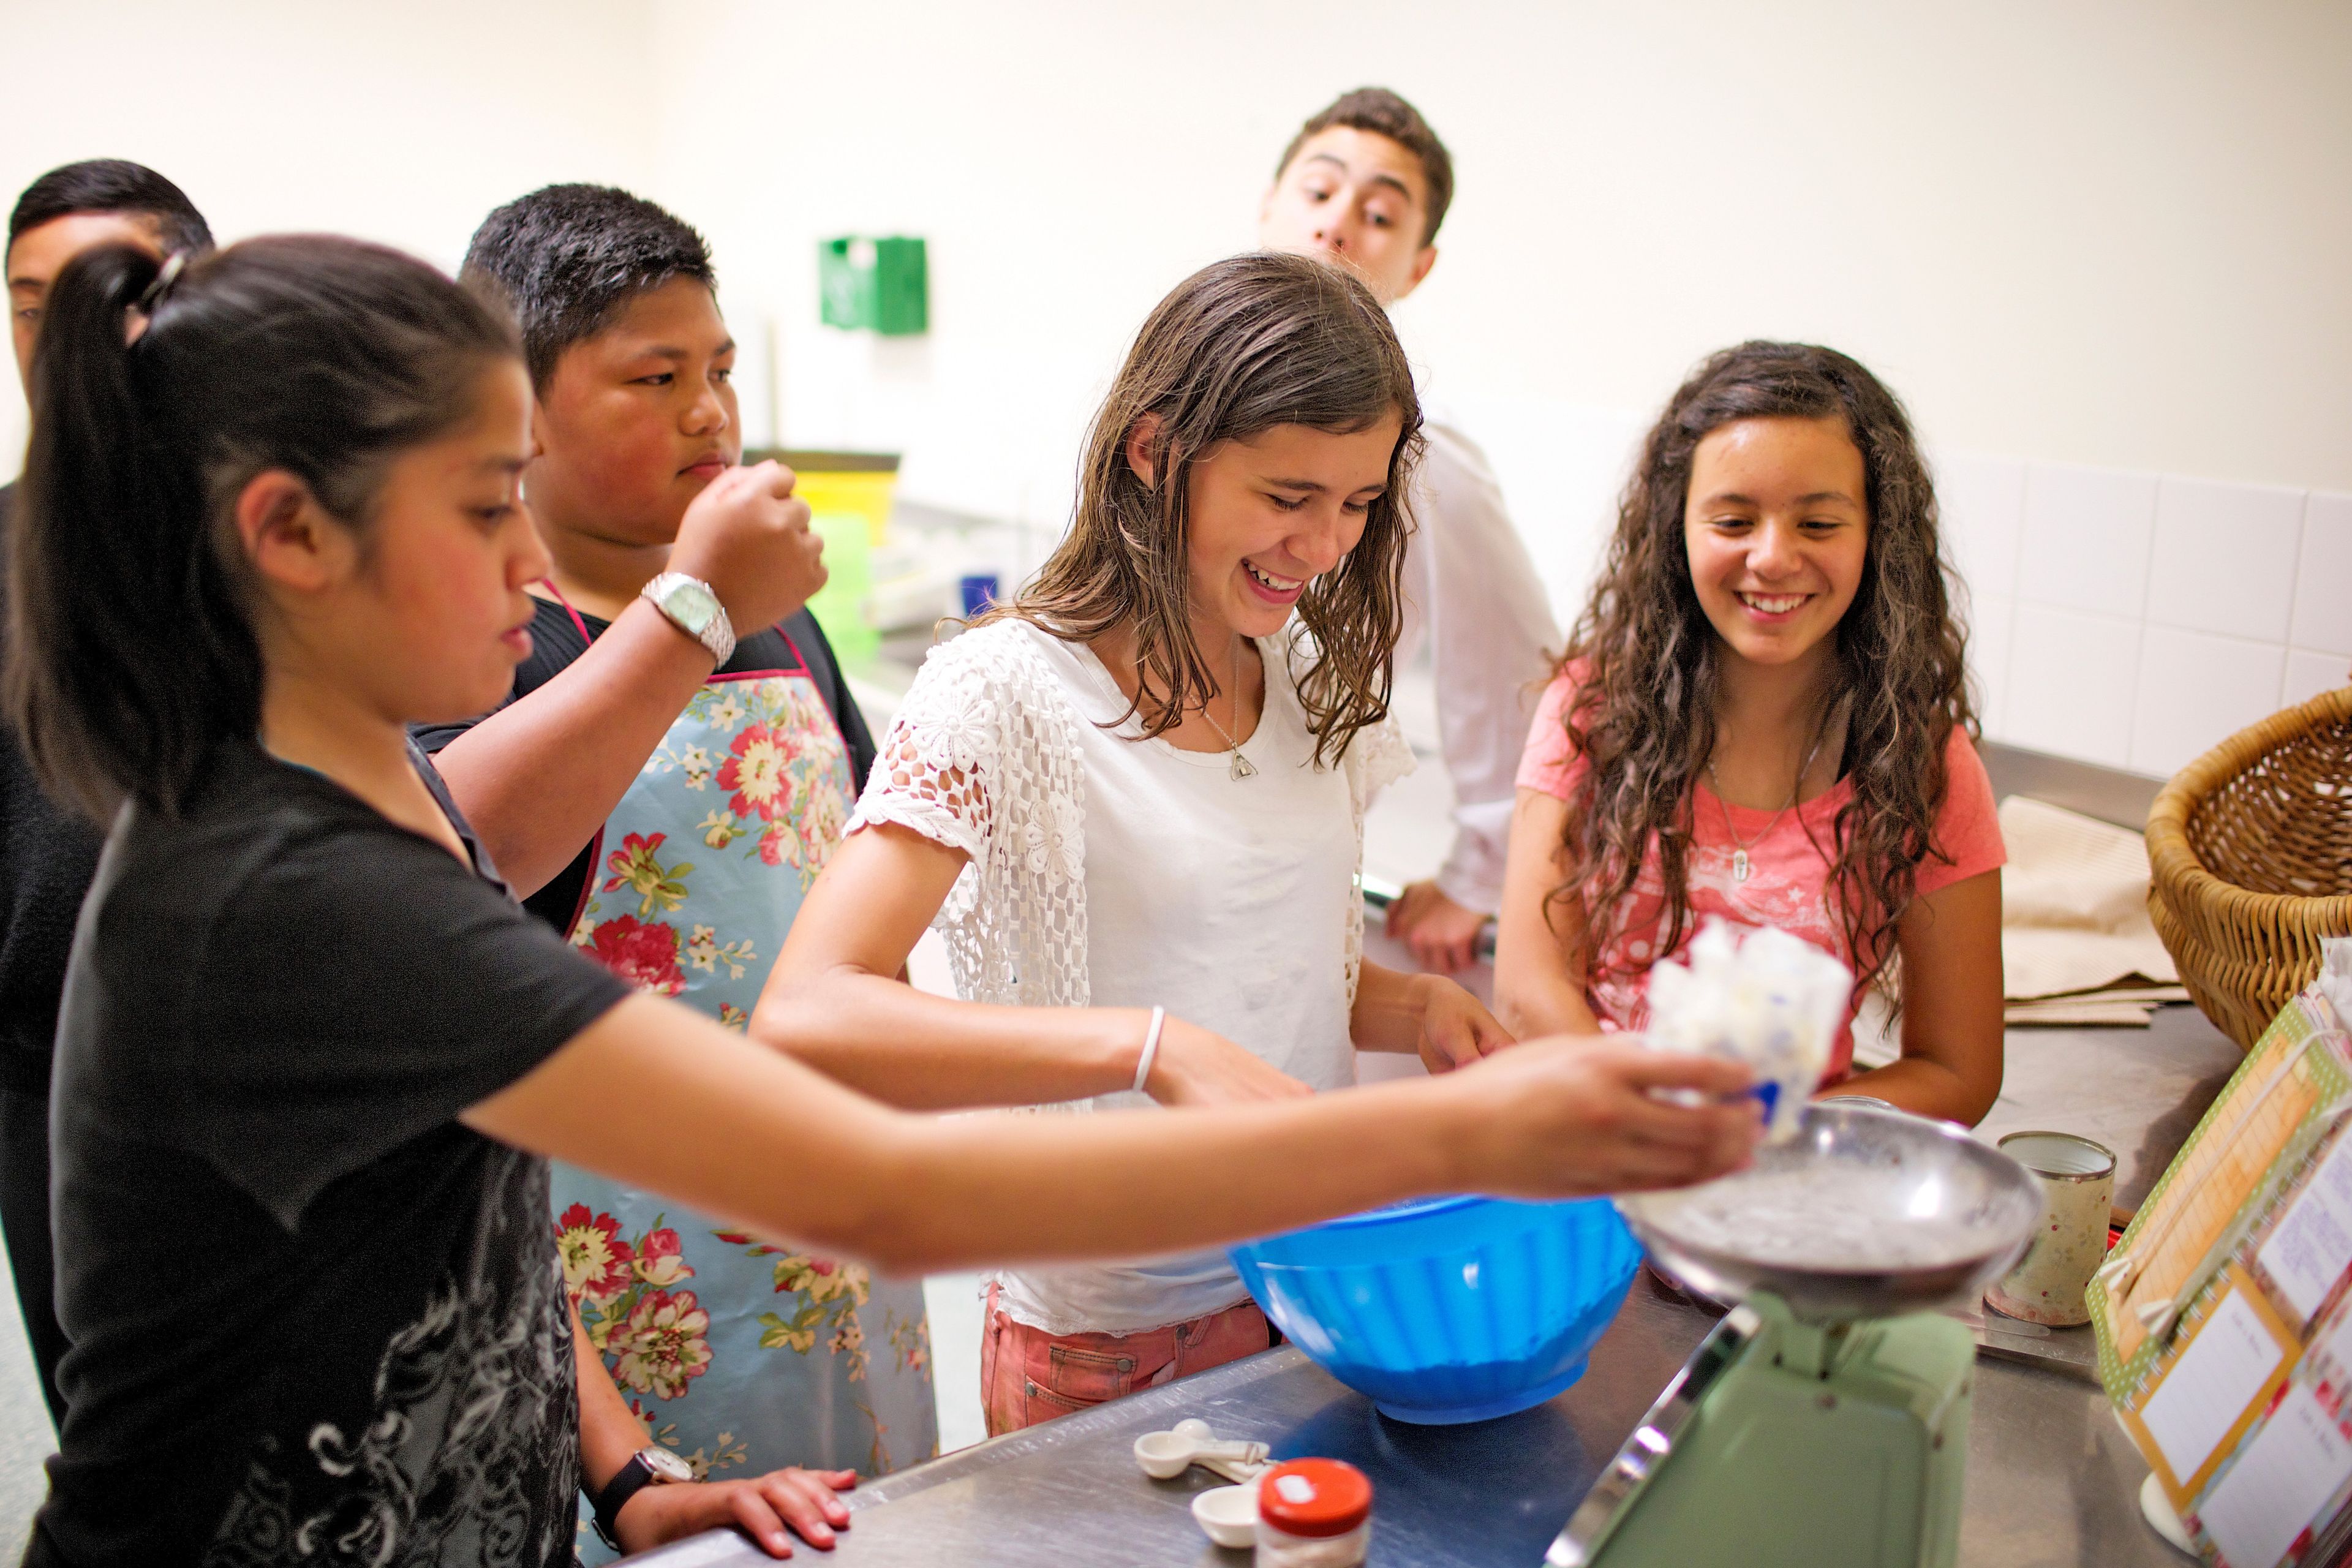 A group of young men and young women bake together for an activity.  